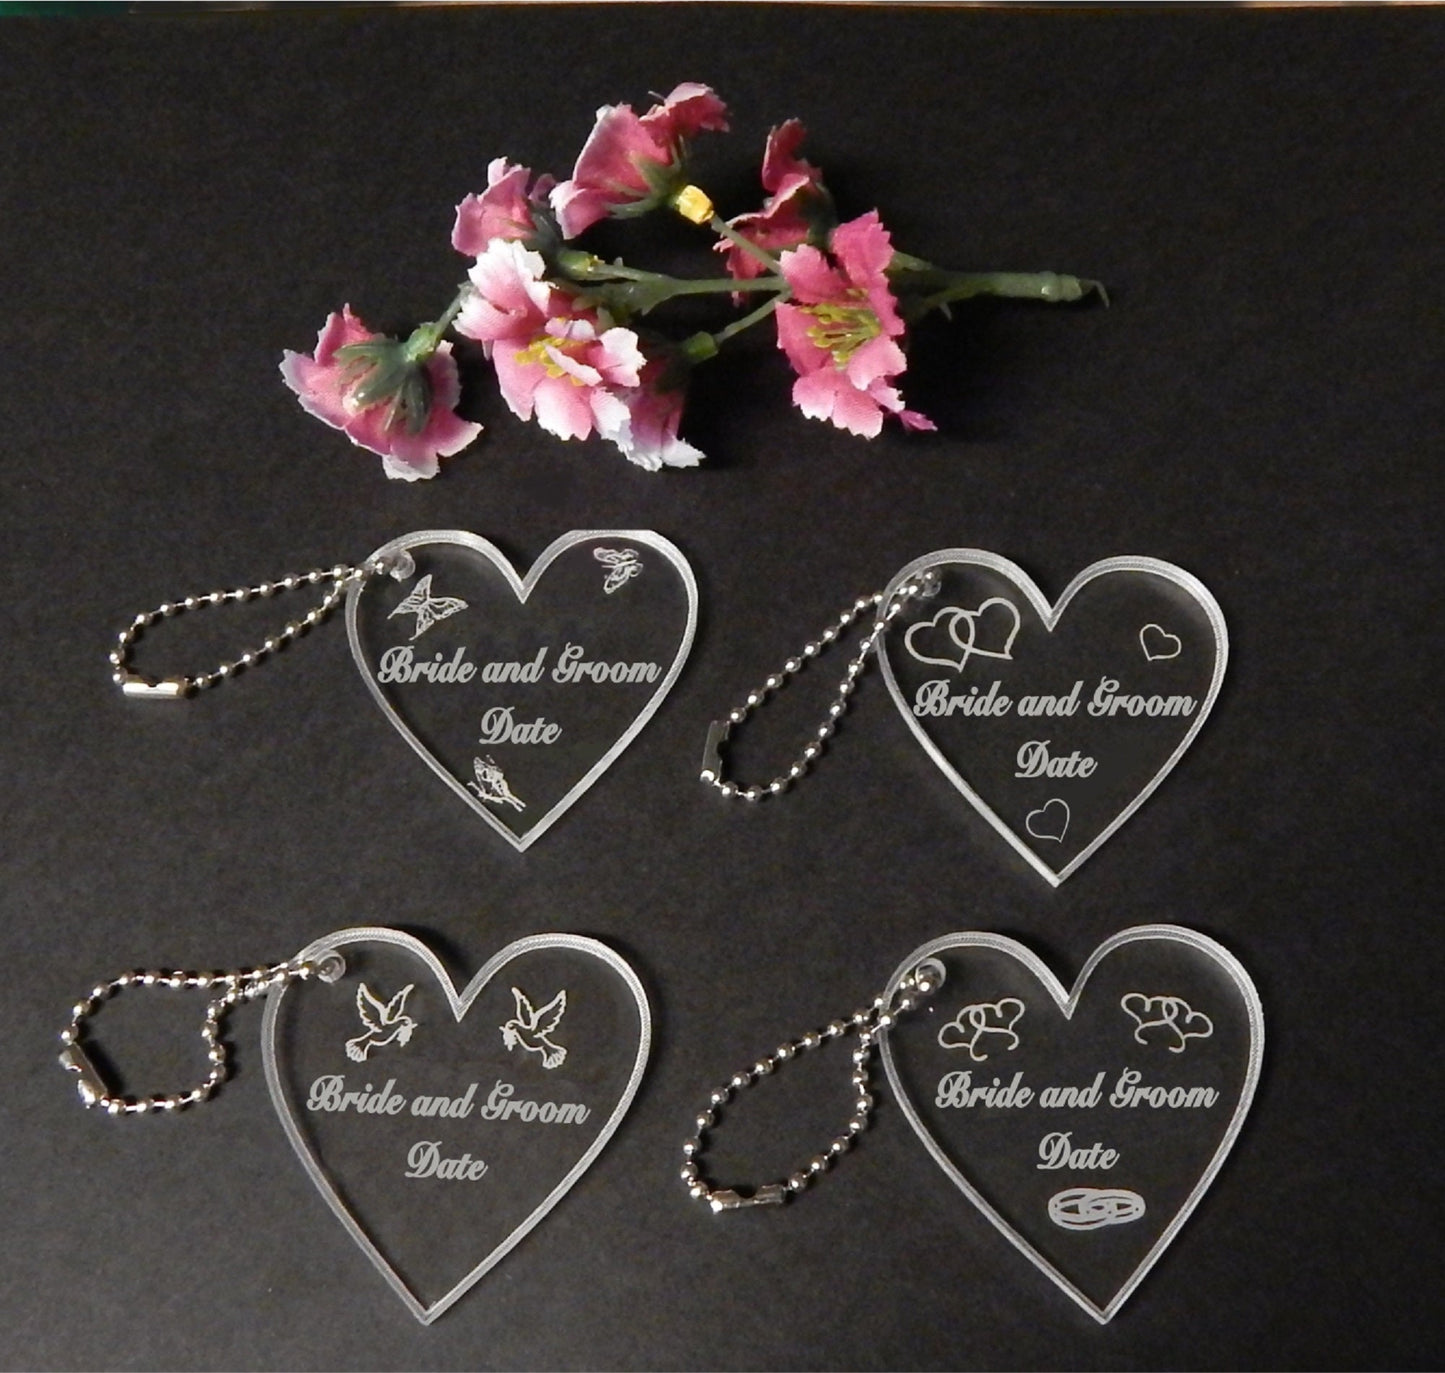 QTY 100 Personalized Heart Key Chain Favors custom engraved acrylic keychains